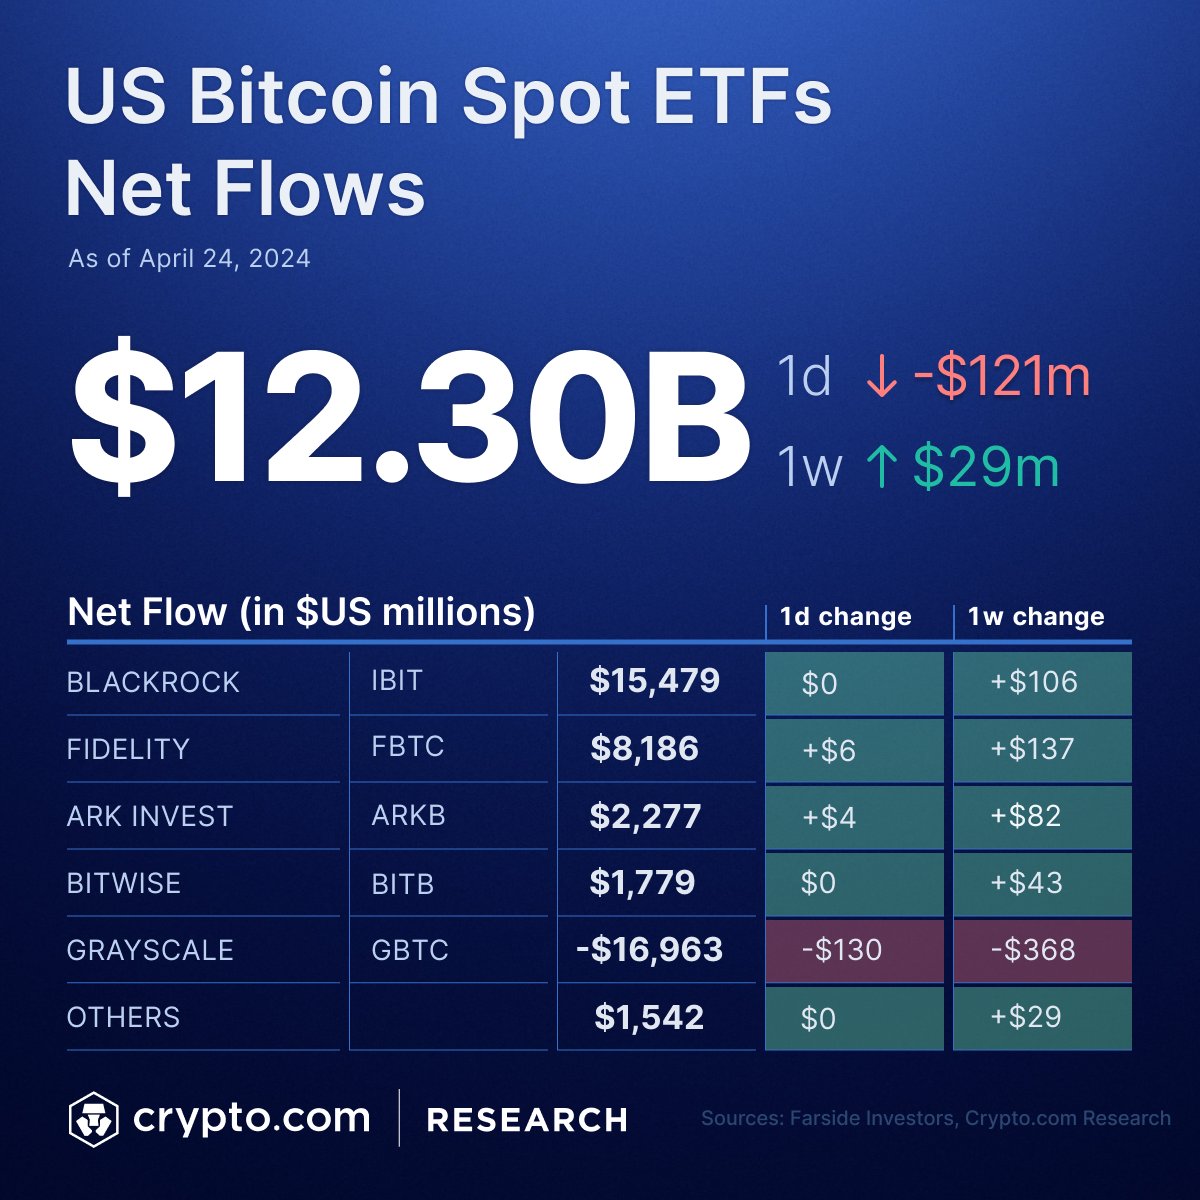 💸 BlackRock’s IBIT ended its 71-day streak of inflows and first saw zero inflow on 24 April. Latest data shows US Spot #Bitcoin ETFs with a total net inflow of $12.30B and daily net outflow of $121M.